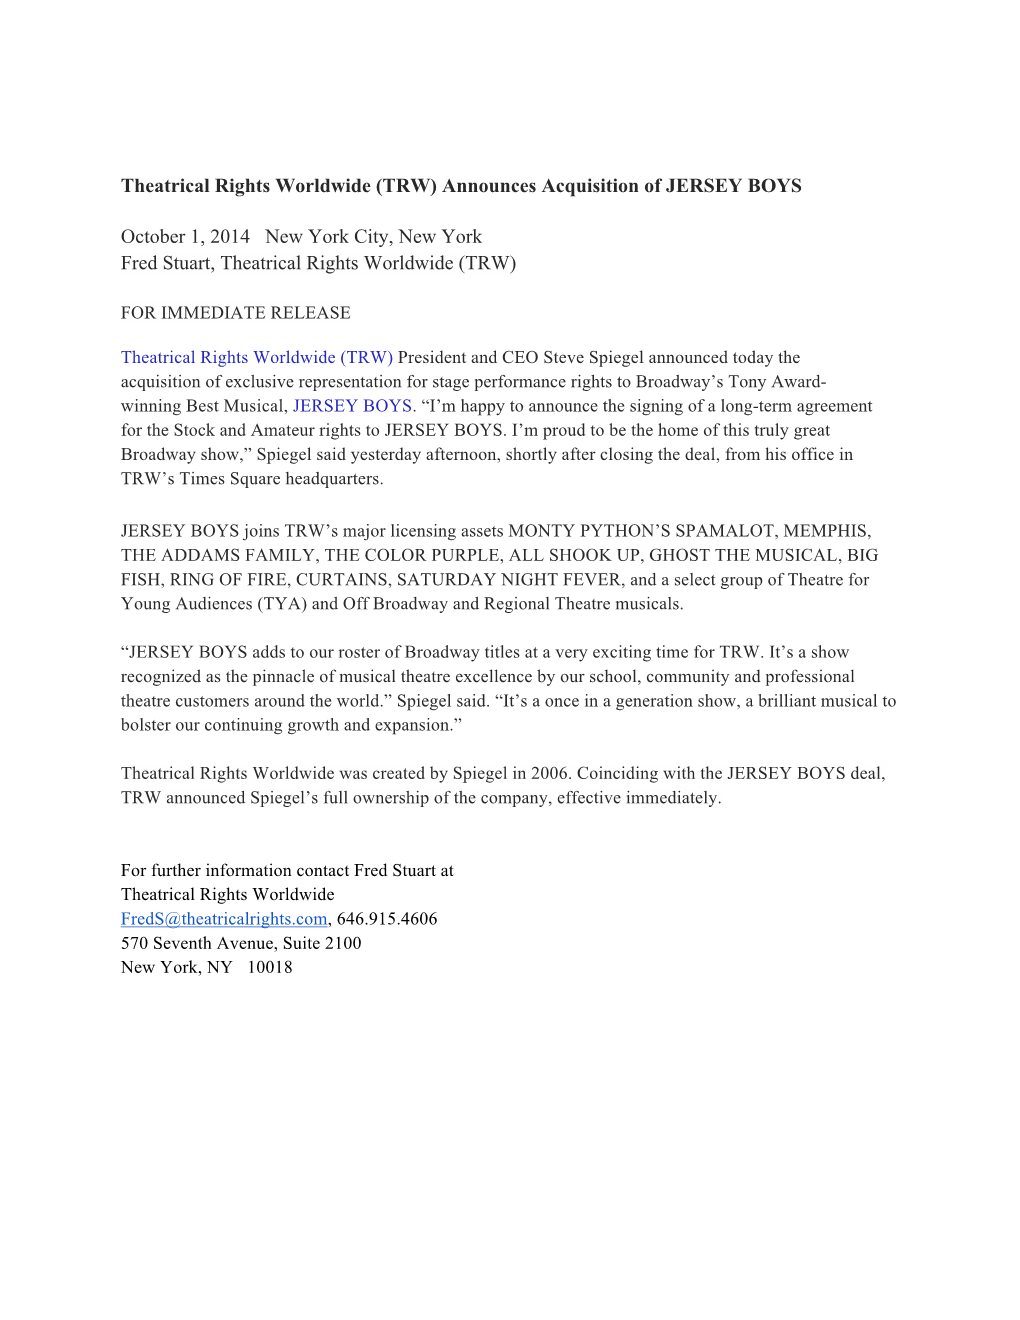 Theatrical Rights Worldwide (TRW) Announces Acquisition of JERSEY BOYS